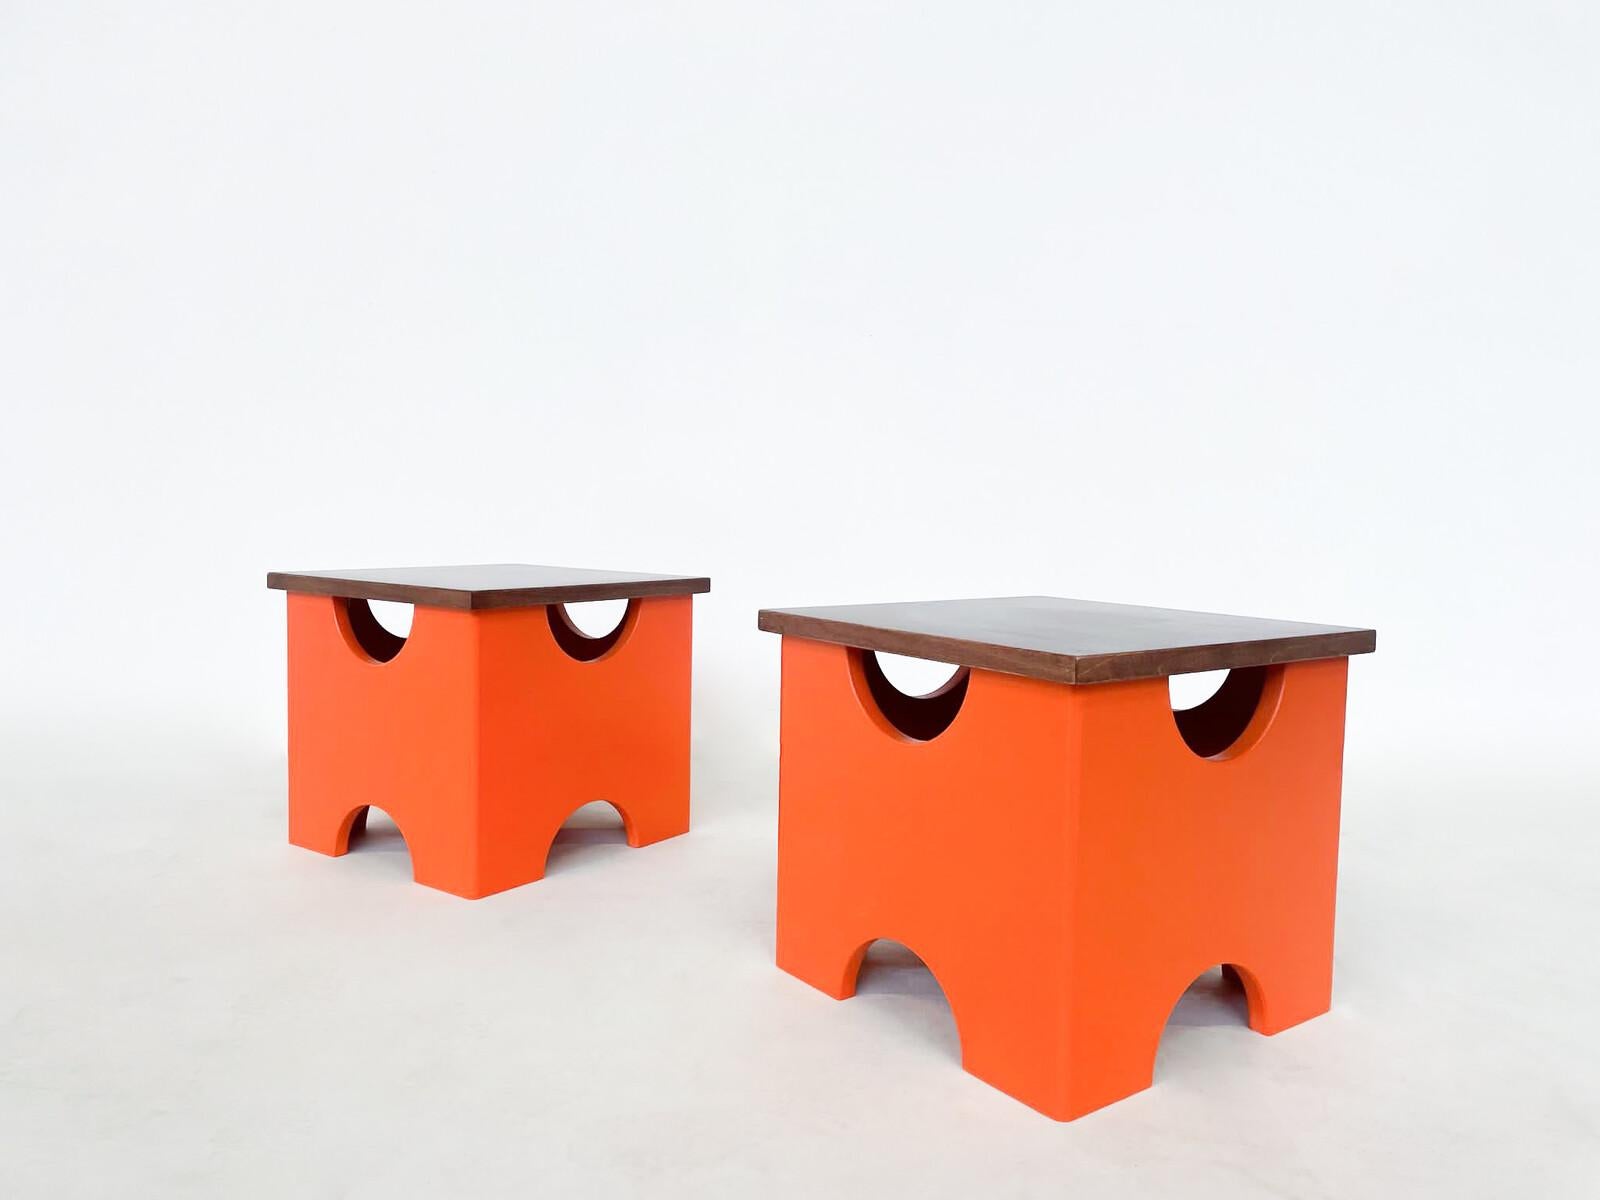 Late 20th Century Mid-Century Modern Pair of Dado Stools by Ettore Sottsass For Sale